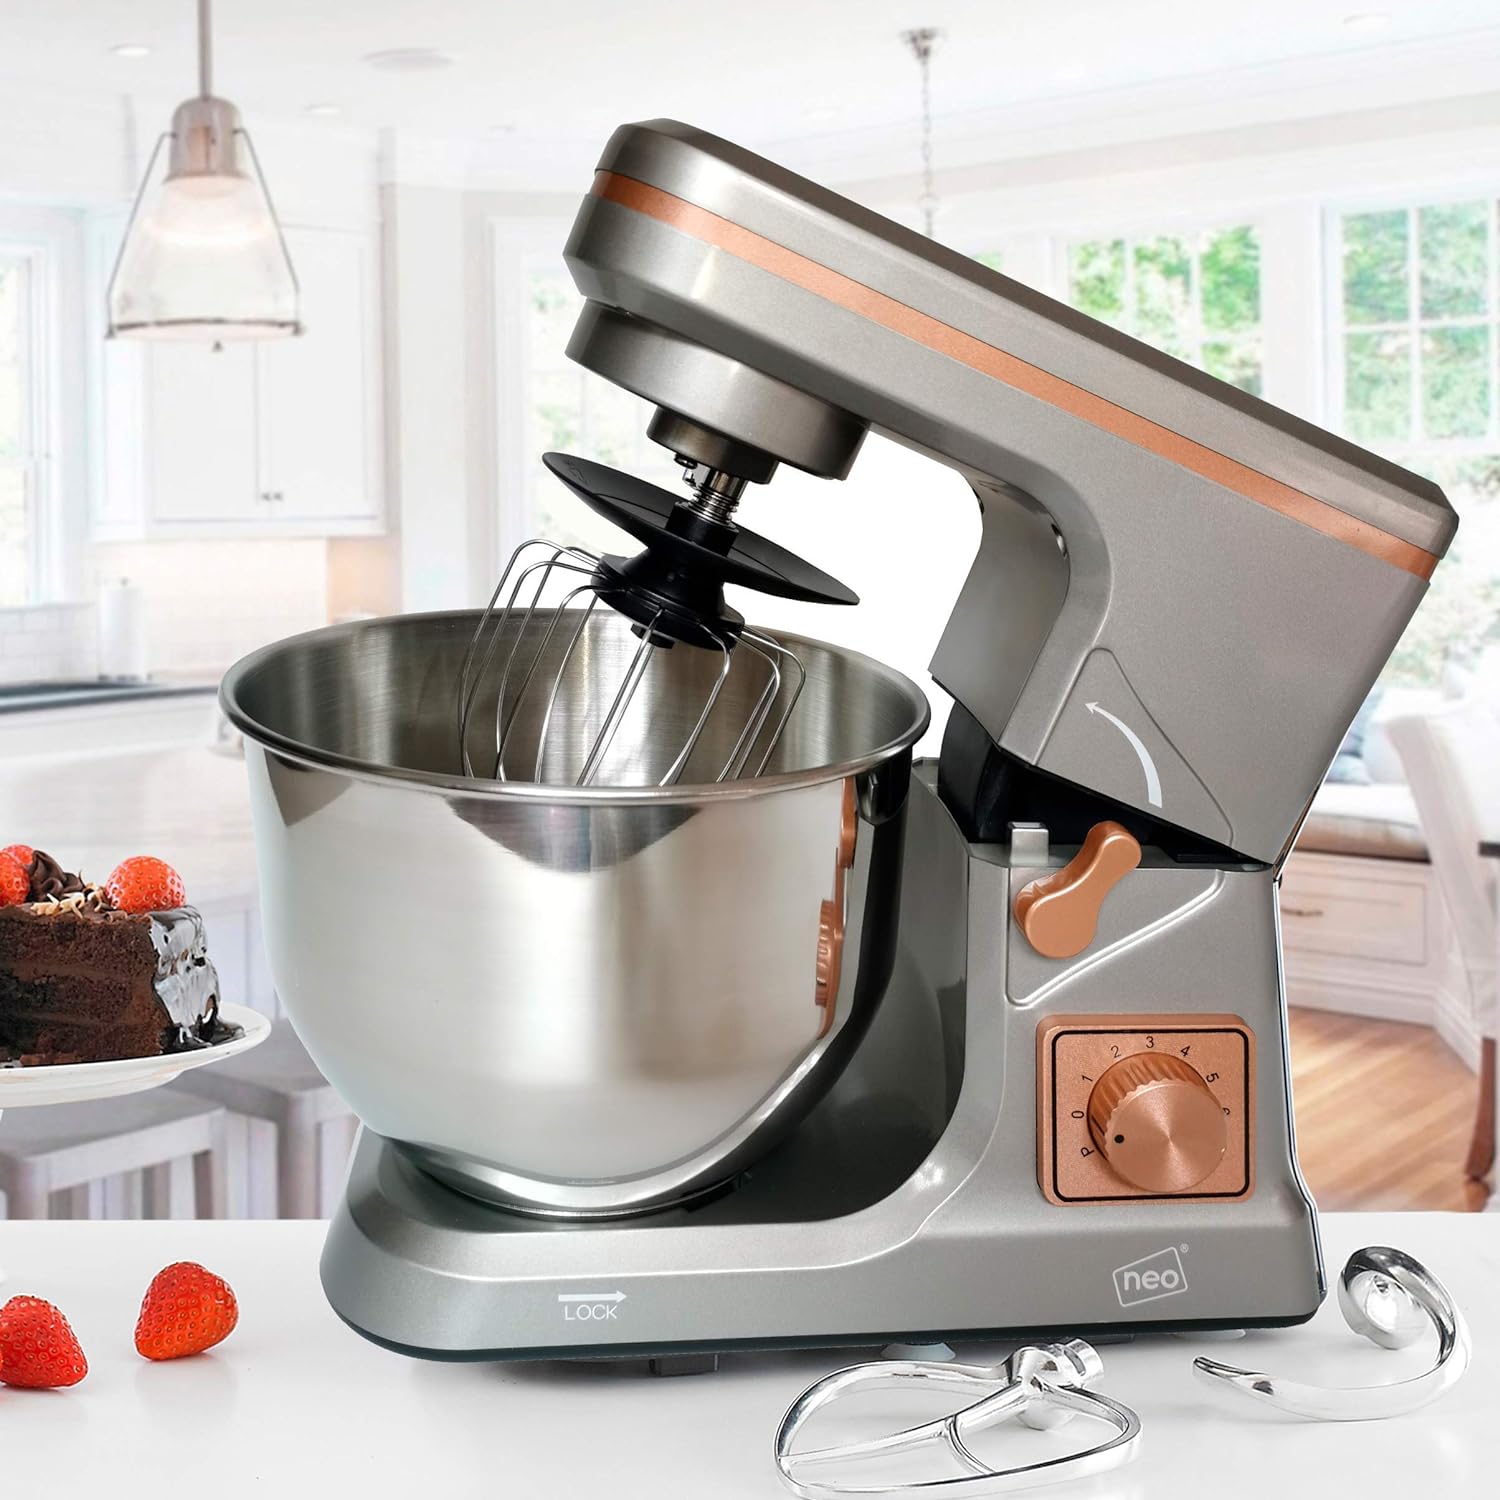 Neo Grey & Copper Food Baking Electric Stand Mixer 5L 6 Speed Stainless Steel Mixing Bowl 800W… - Amazing Gadgets Outlet